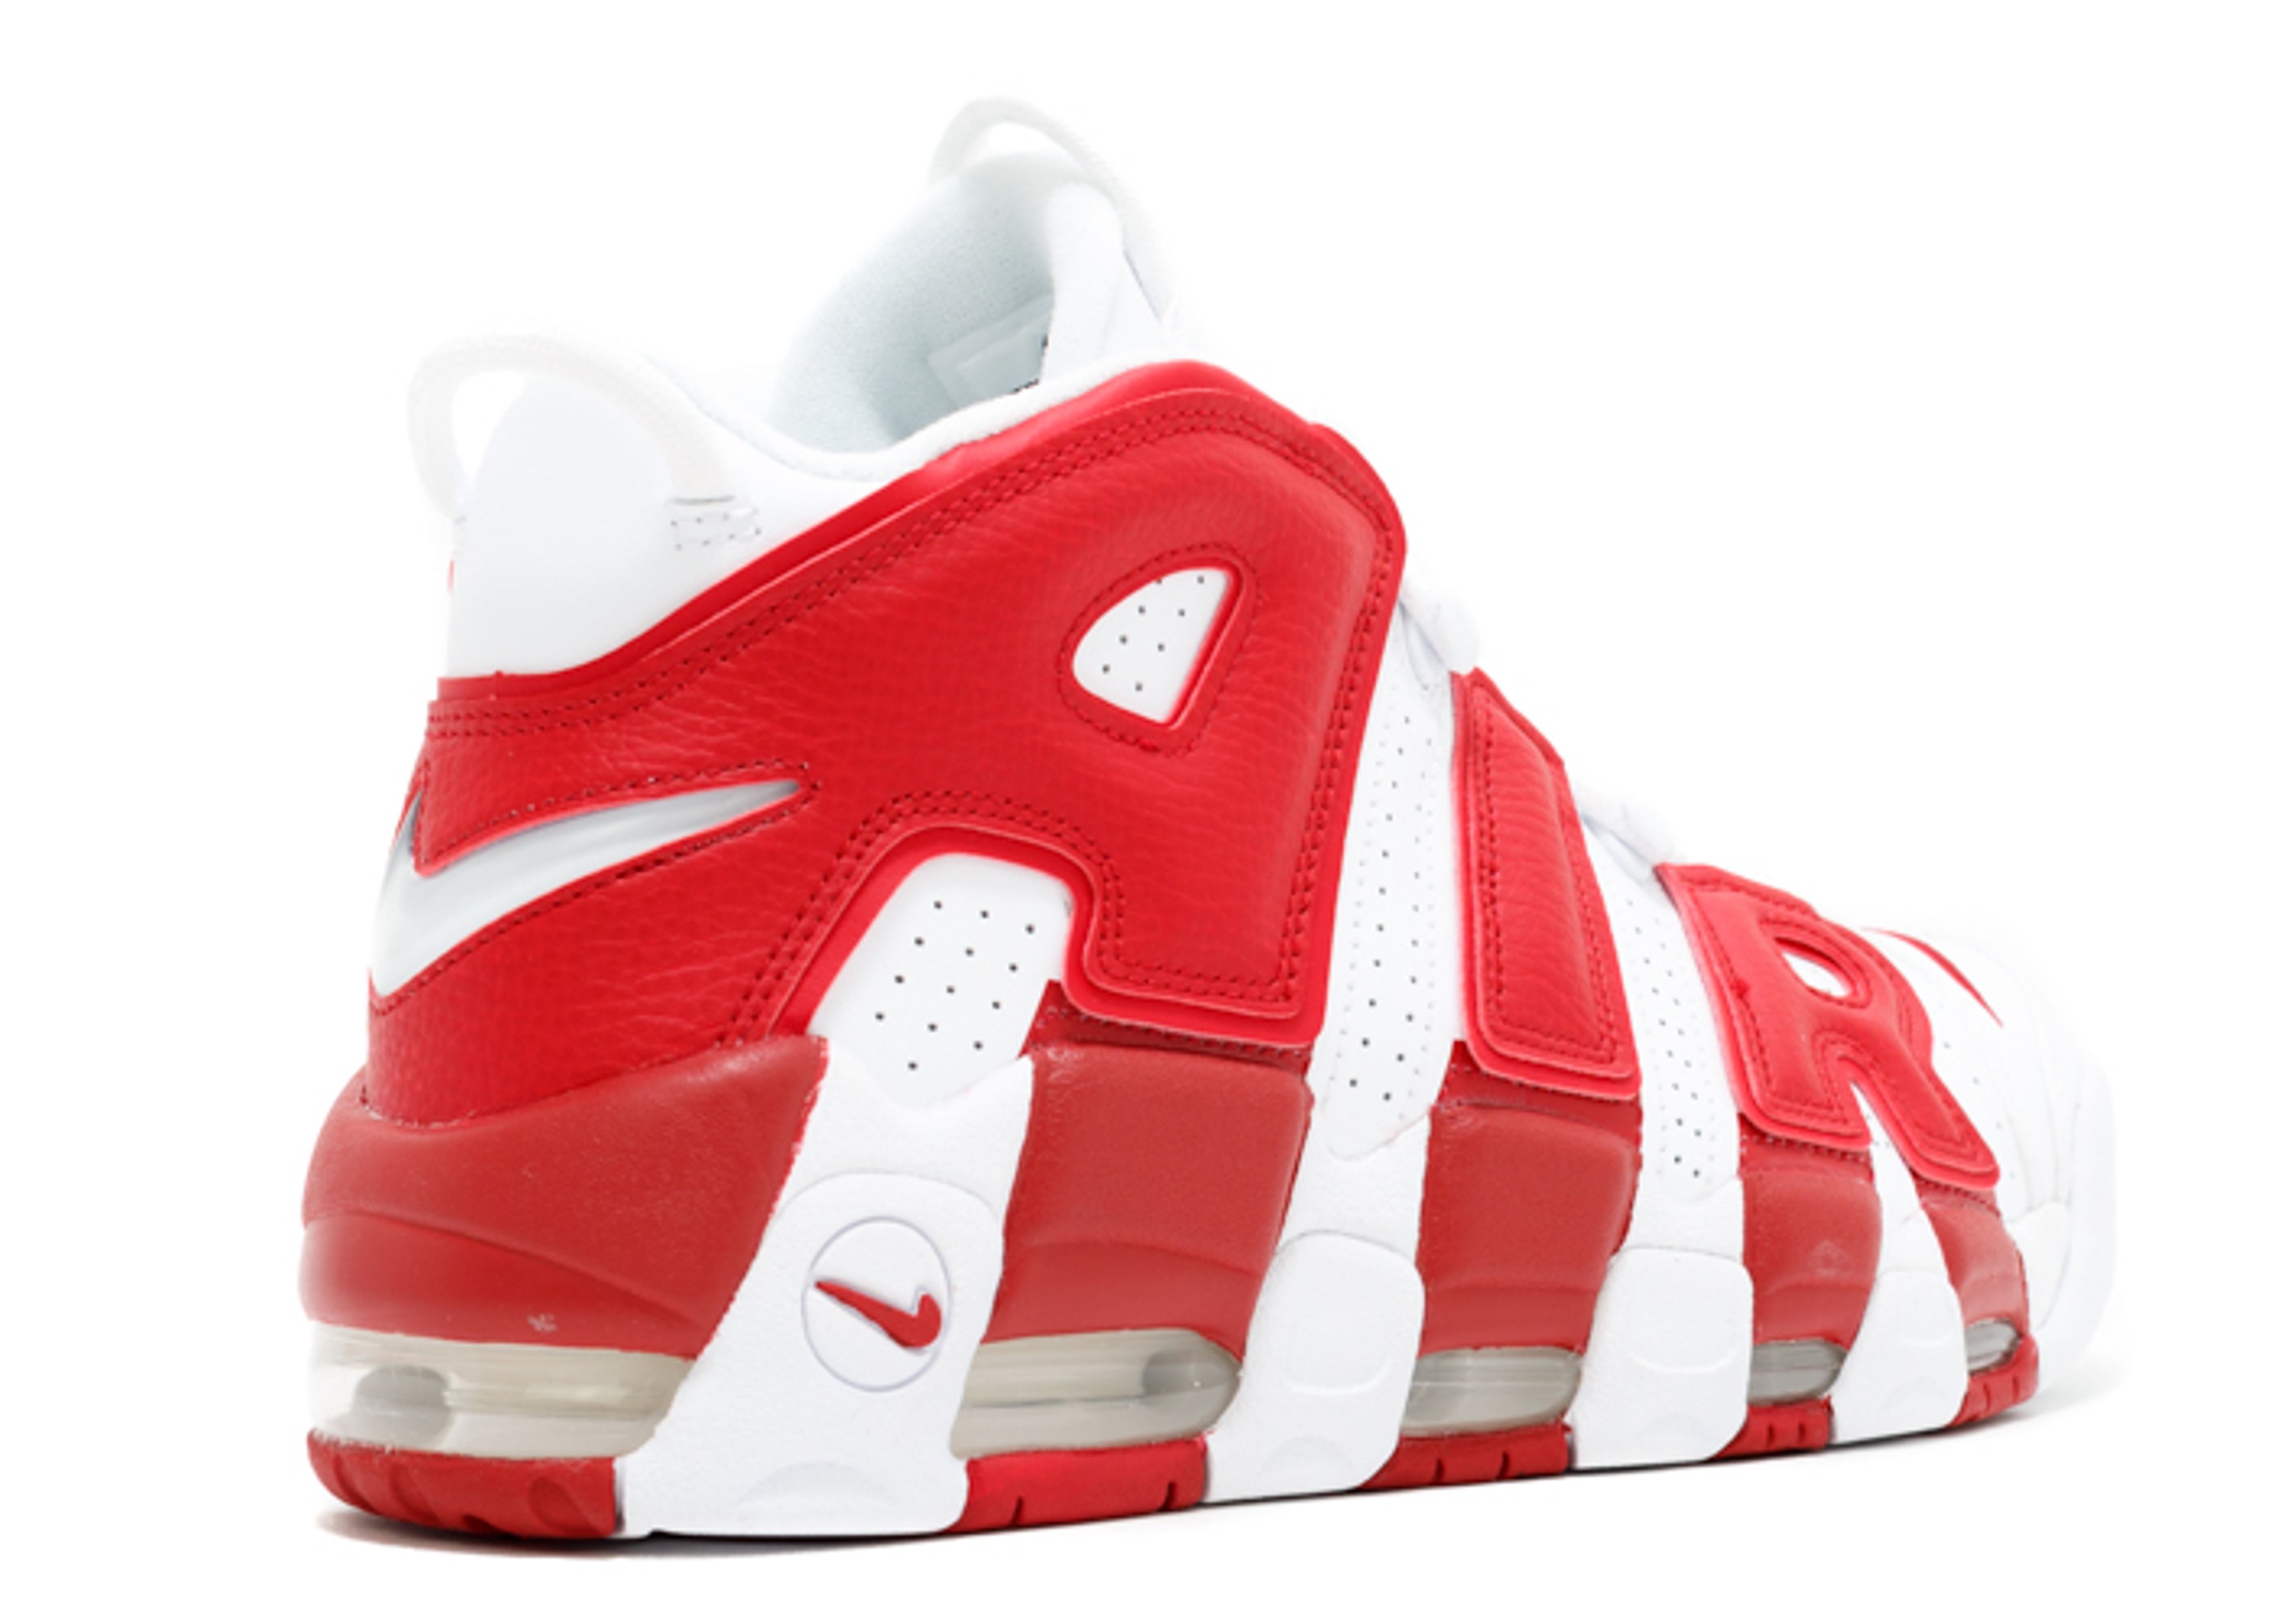 Nike Air more Uptempo 96 White Red. Nike Air more Uptempo Red White. Nike Uptempo White Gym Red. Nike Air Uptempo White Red.